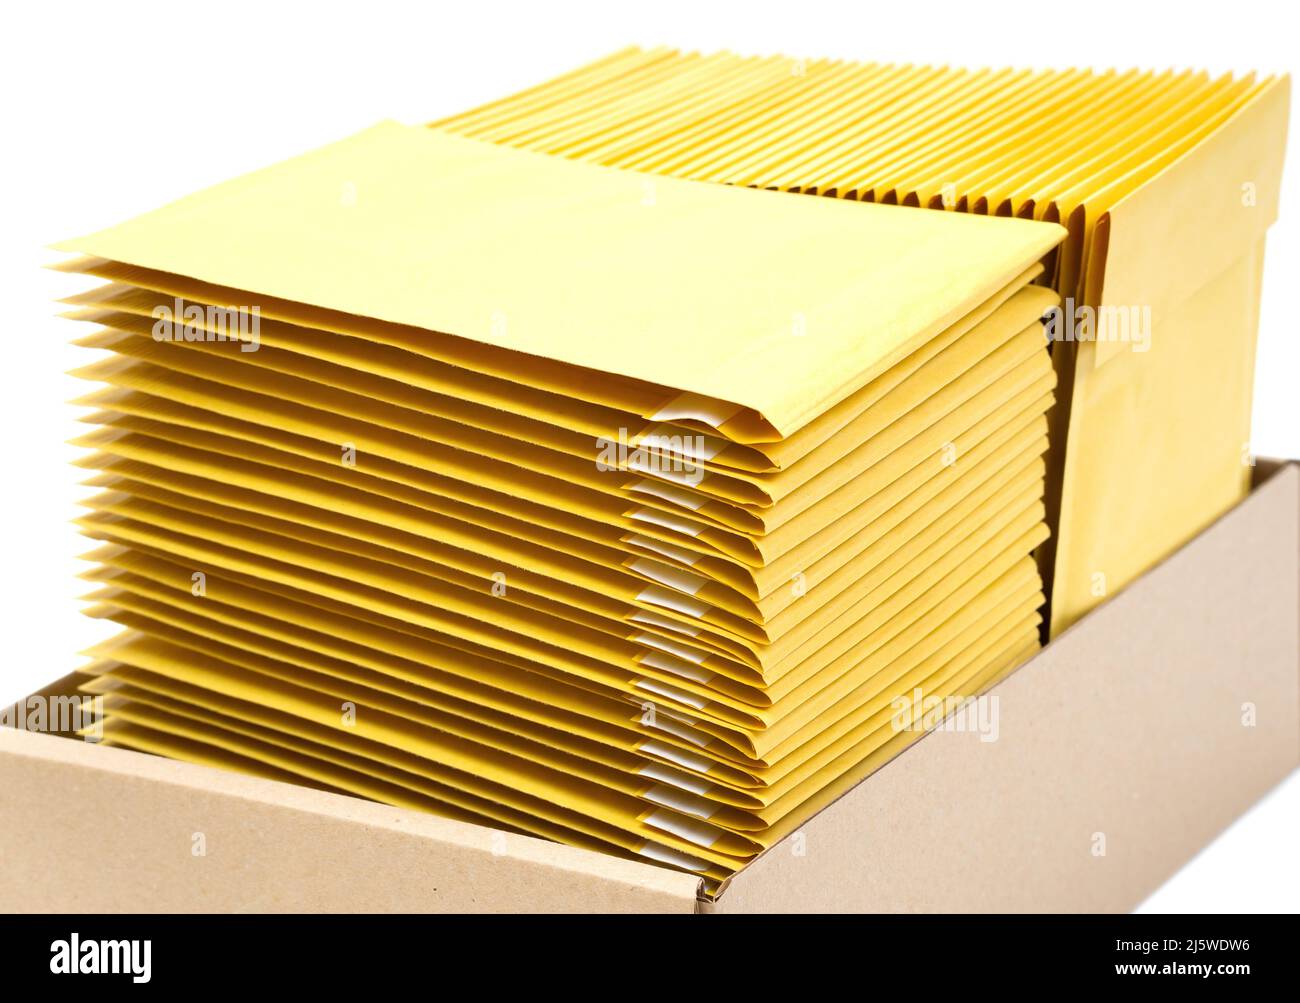 Two stacks of yellow envelopes in a kraft cardboard box isolated on white.  Office supplies Stock Photo - Alamy